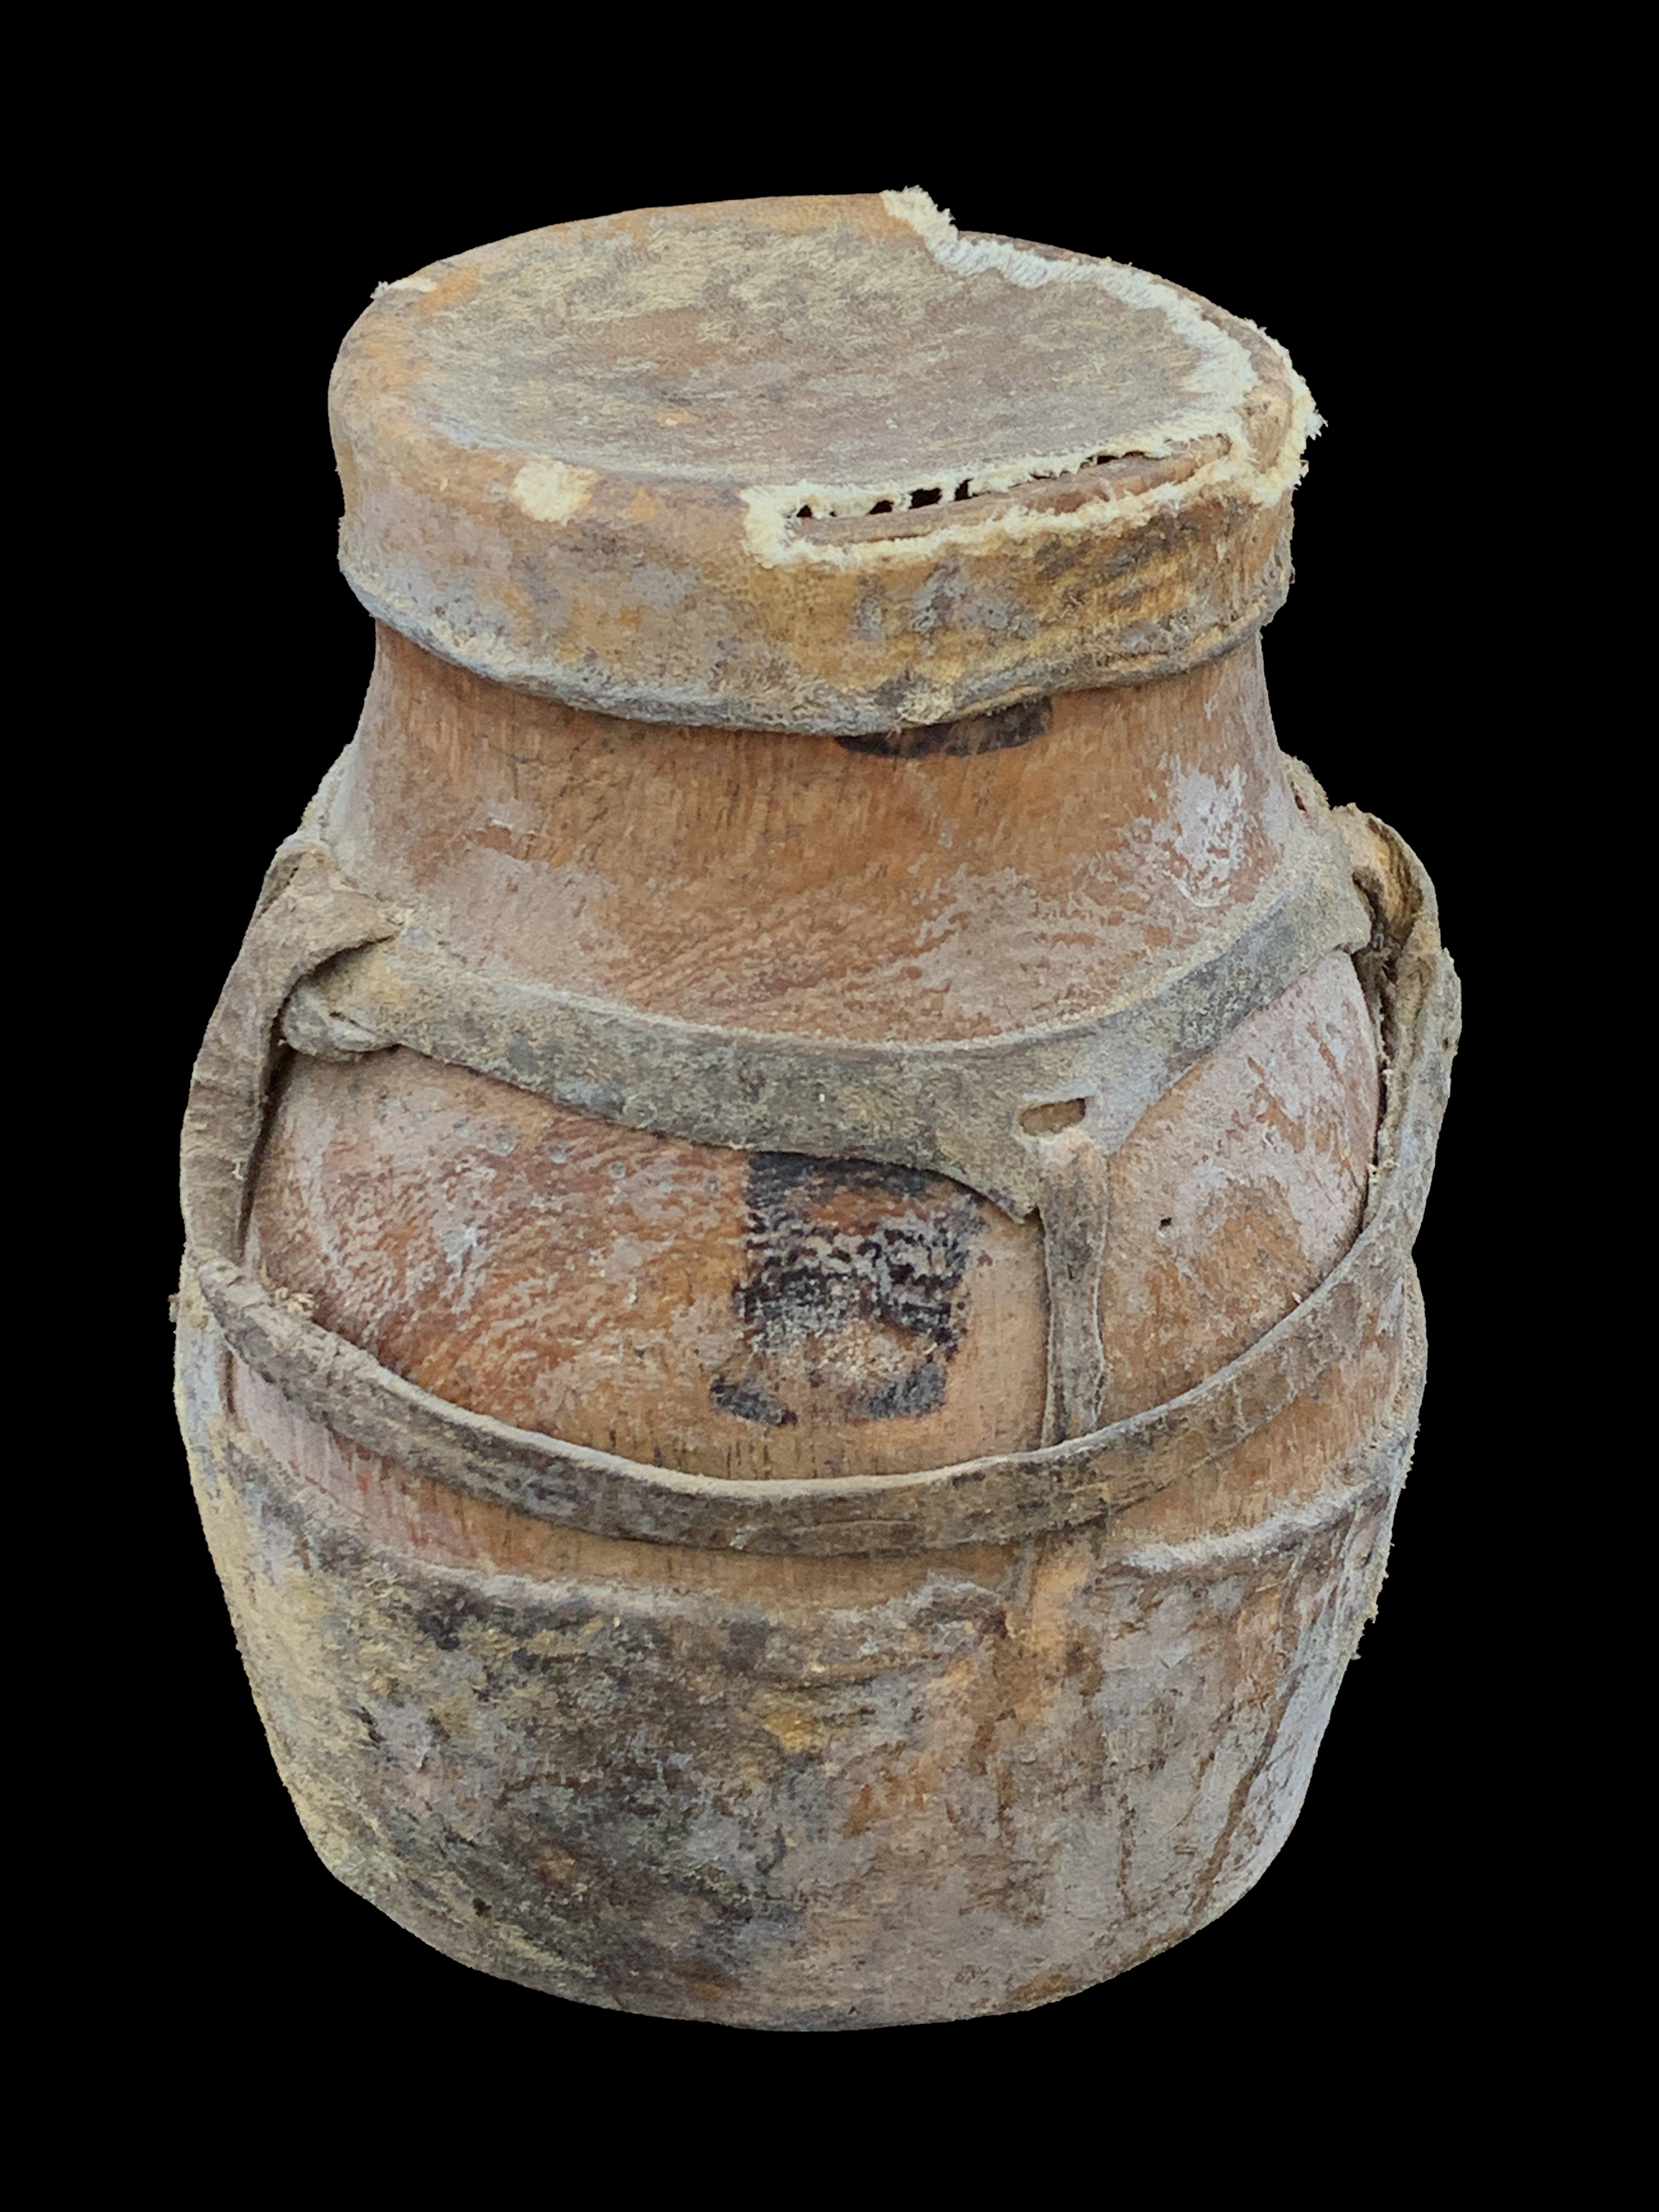 Single Meat Container (6) - Pokot and Turkana People, Northern Kenya